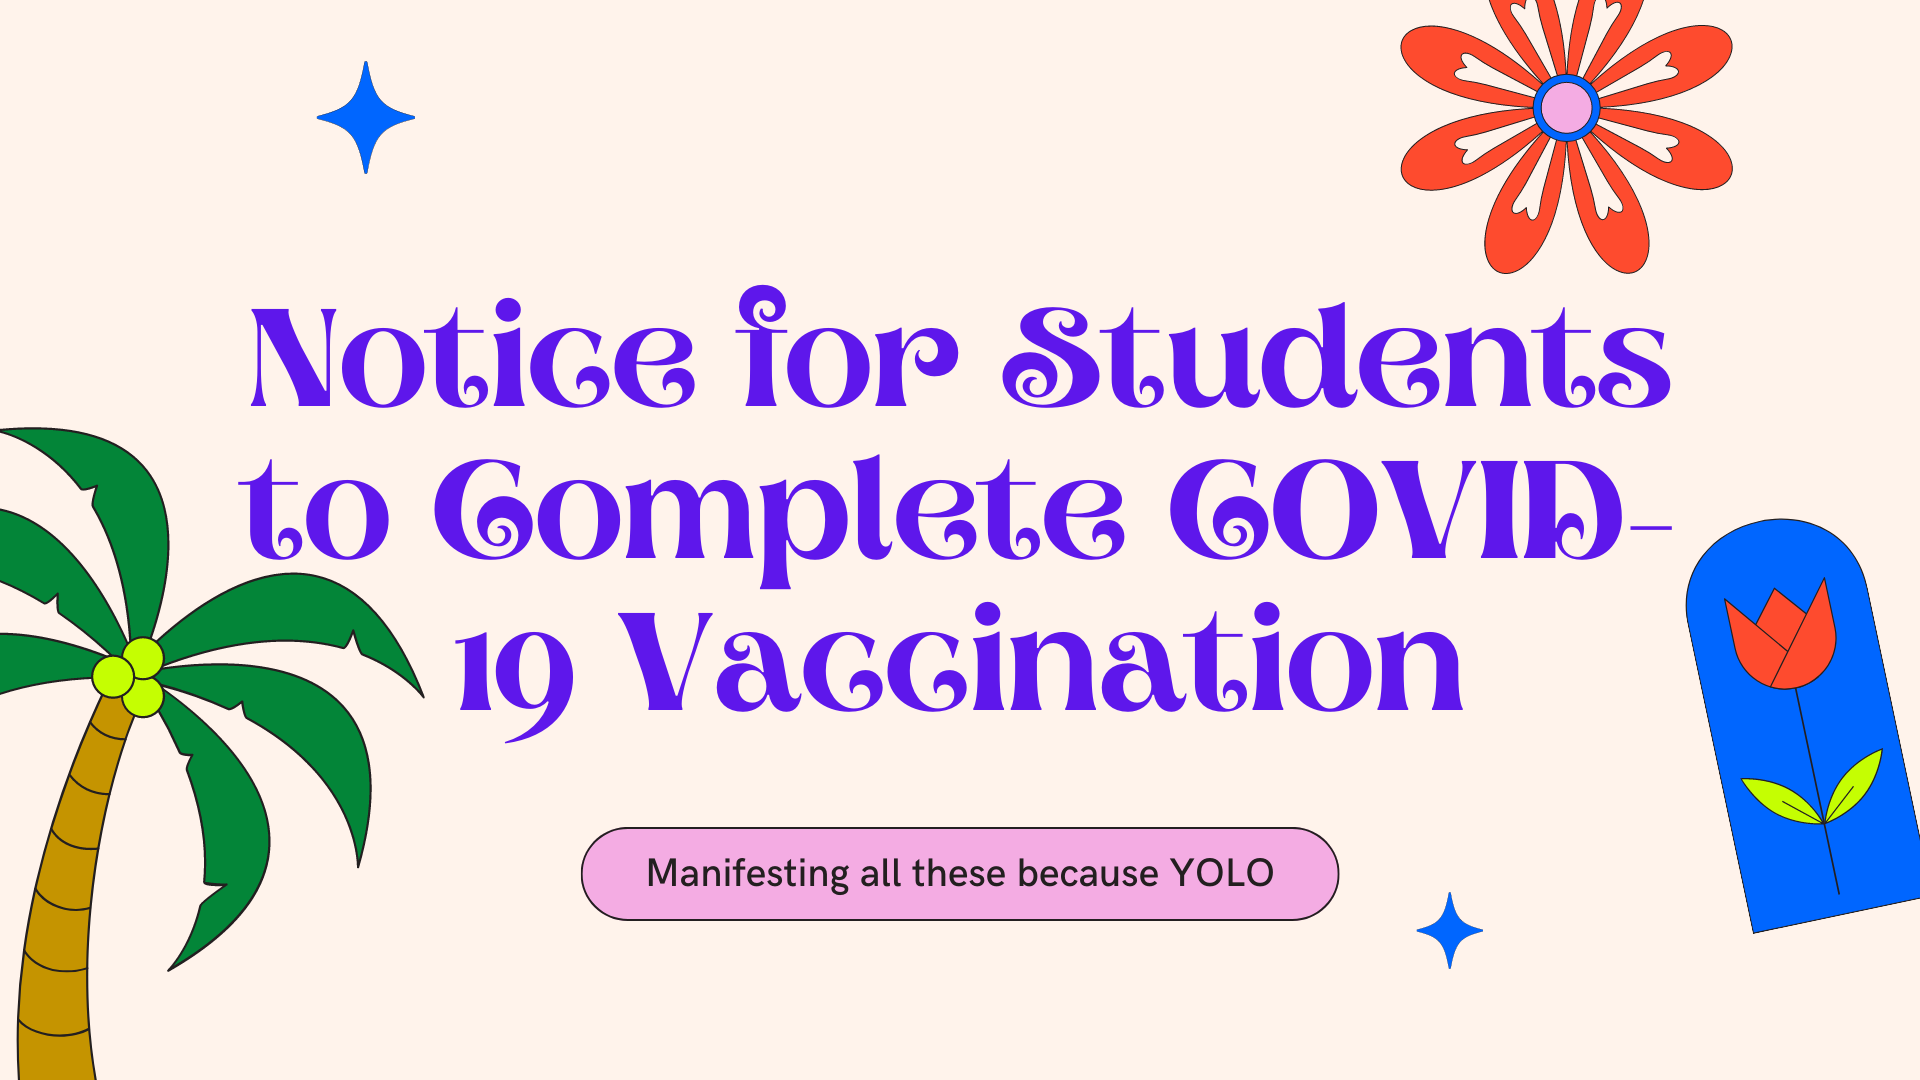 Notice for Students to Complete COVID-19 Vaccination